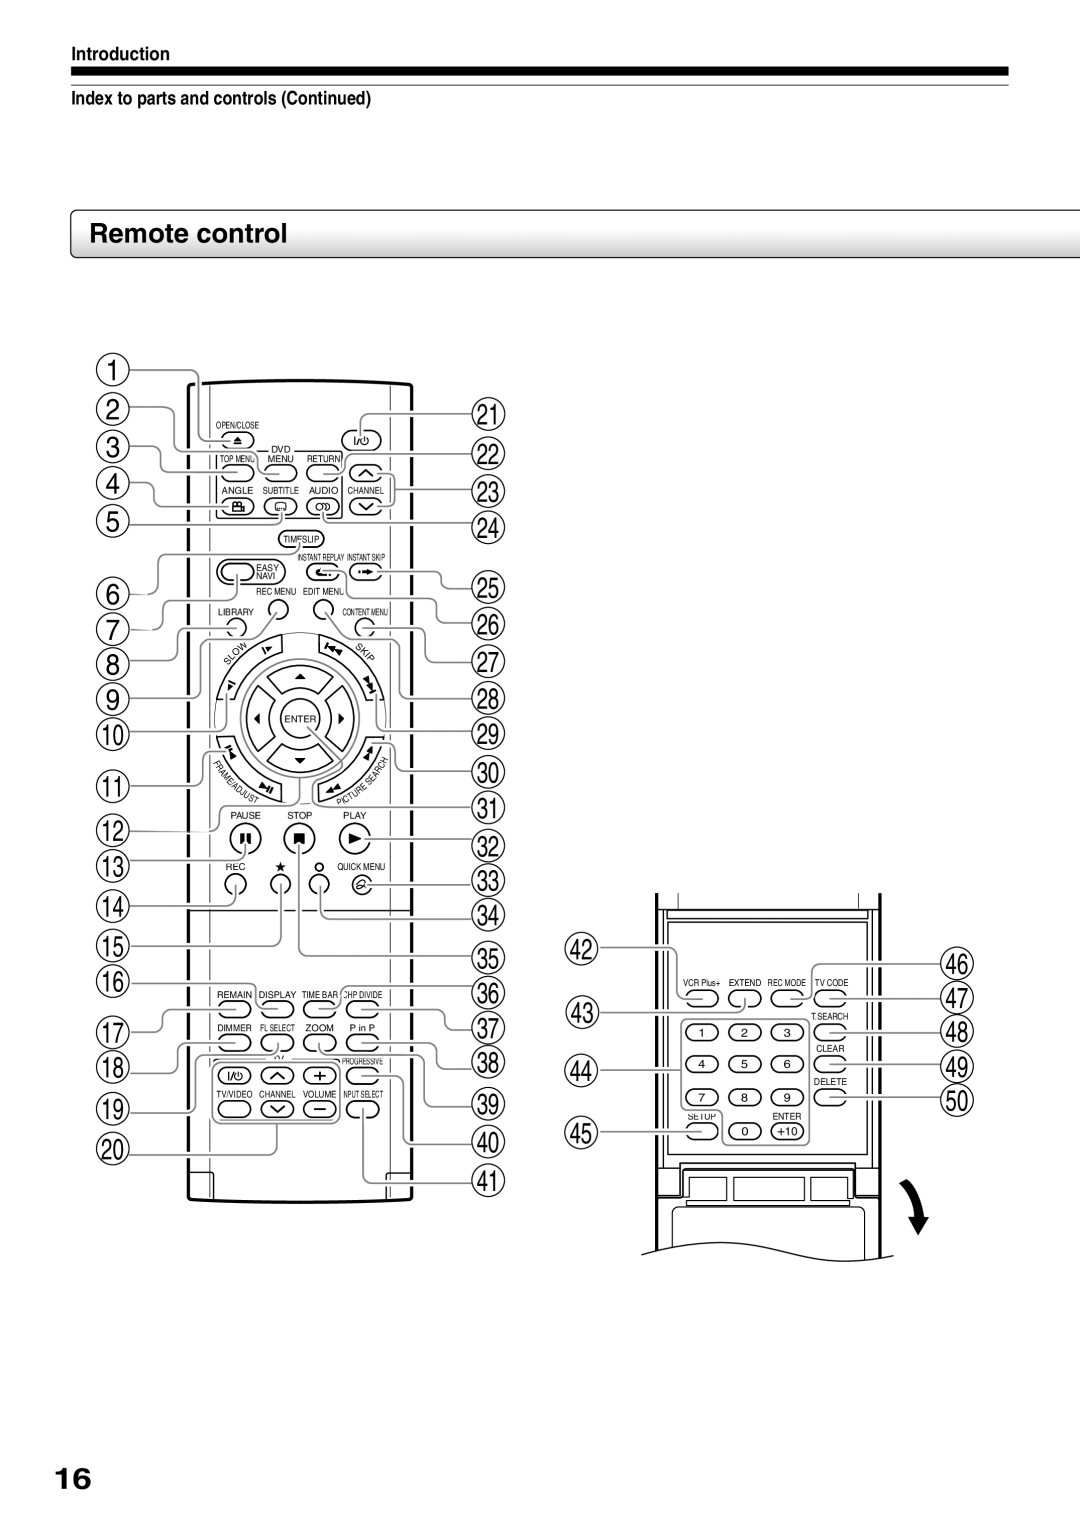 Toshiba D-R2SC, D-R2SU, D-KR2SU owner manual Remote control, Introduction Index to parts and controls Continued, 0 +10 